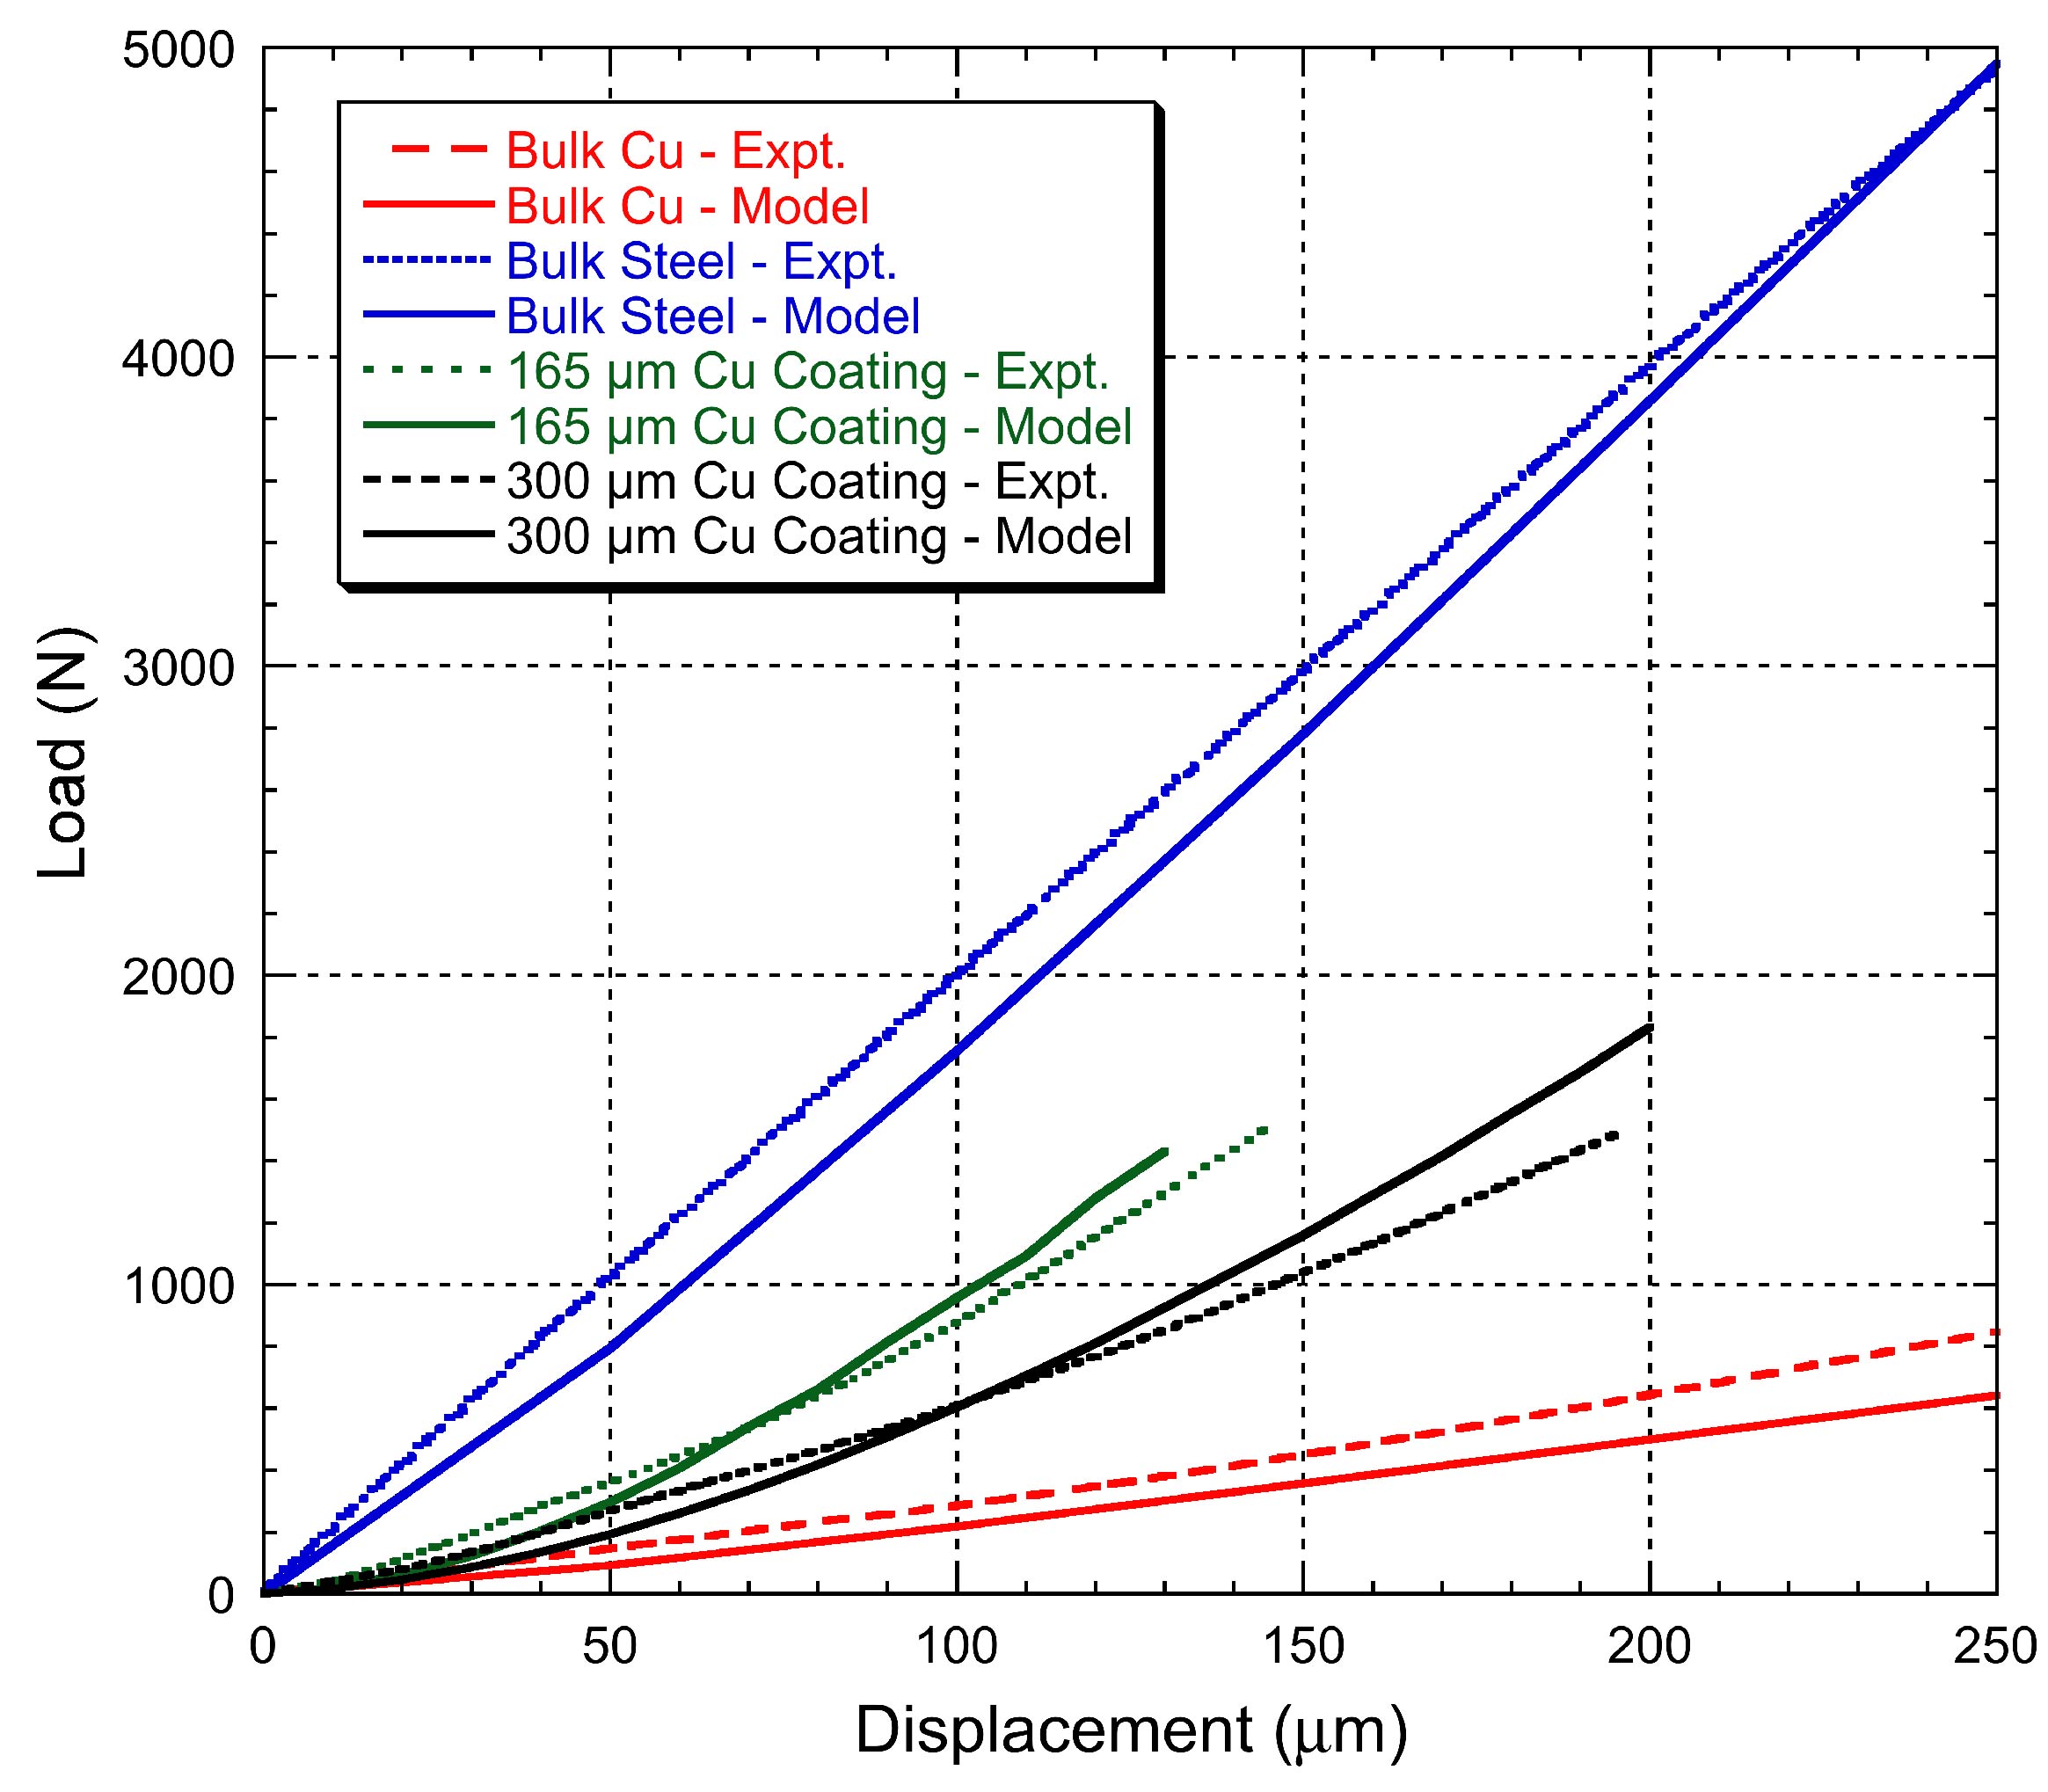 Comparison between FE simulations and experimental data for a known material system with a 1.5mm radius ball bearing. 